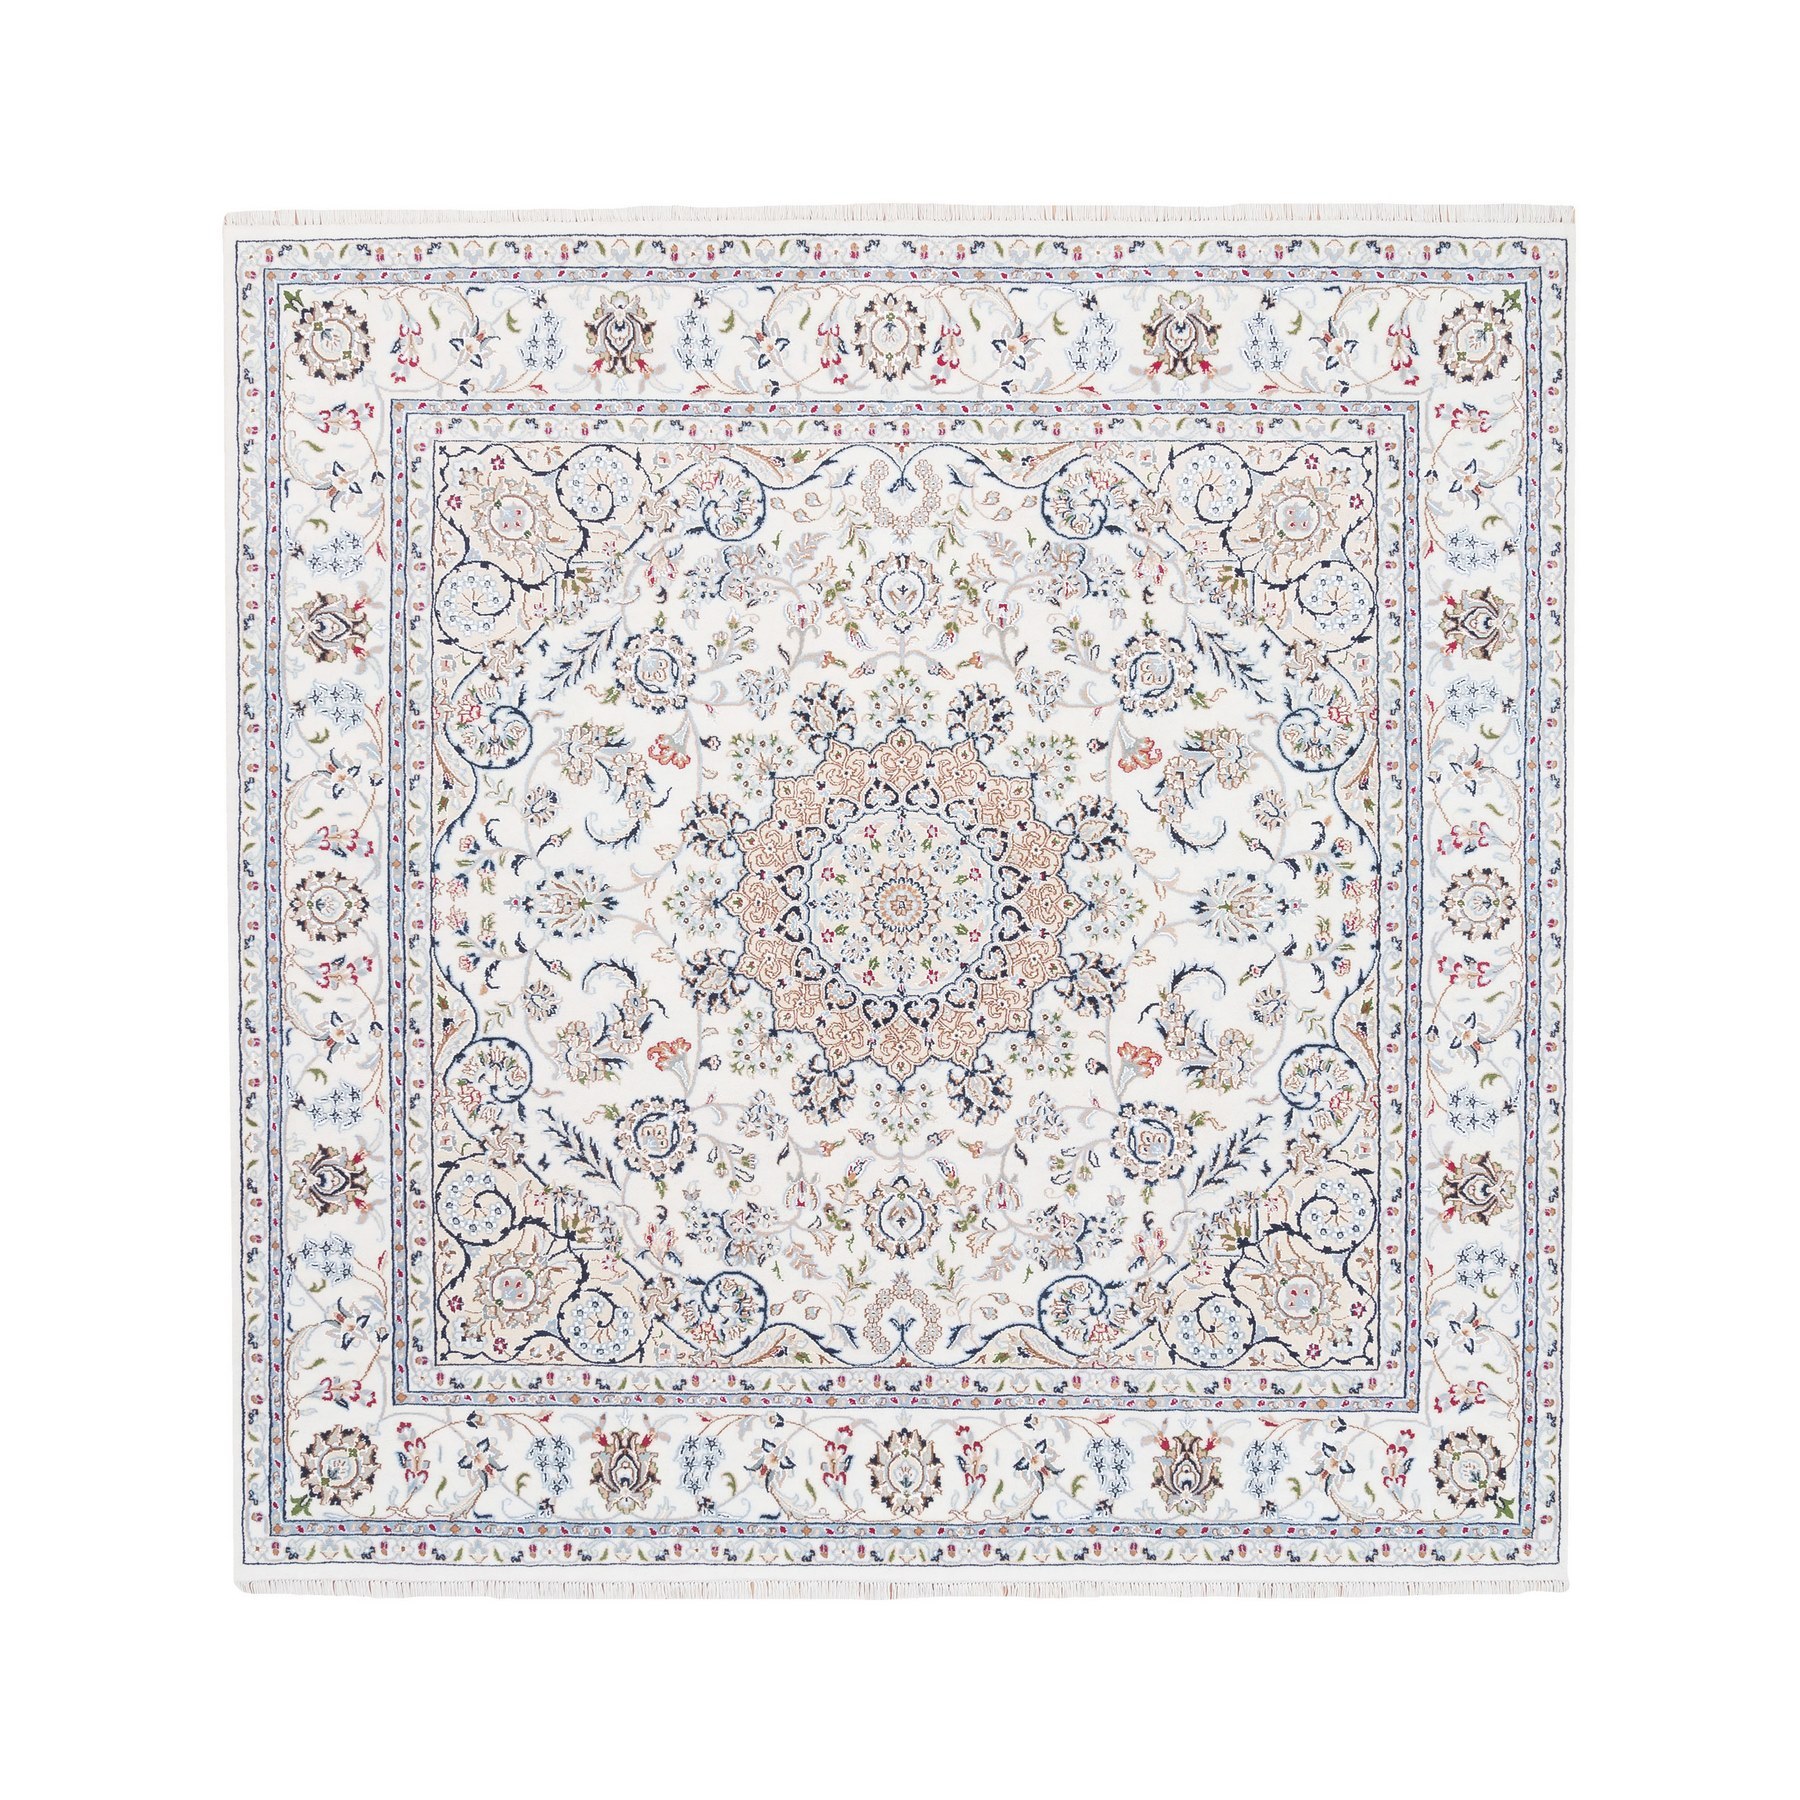 Pirniakan Collection Hand Knotted Ivory Rug No: 1125614